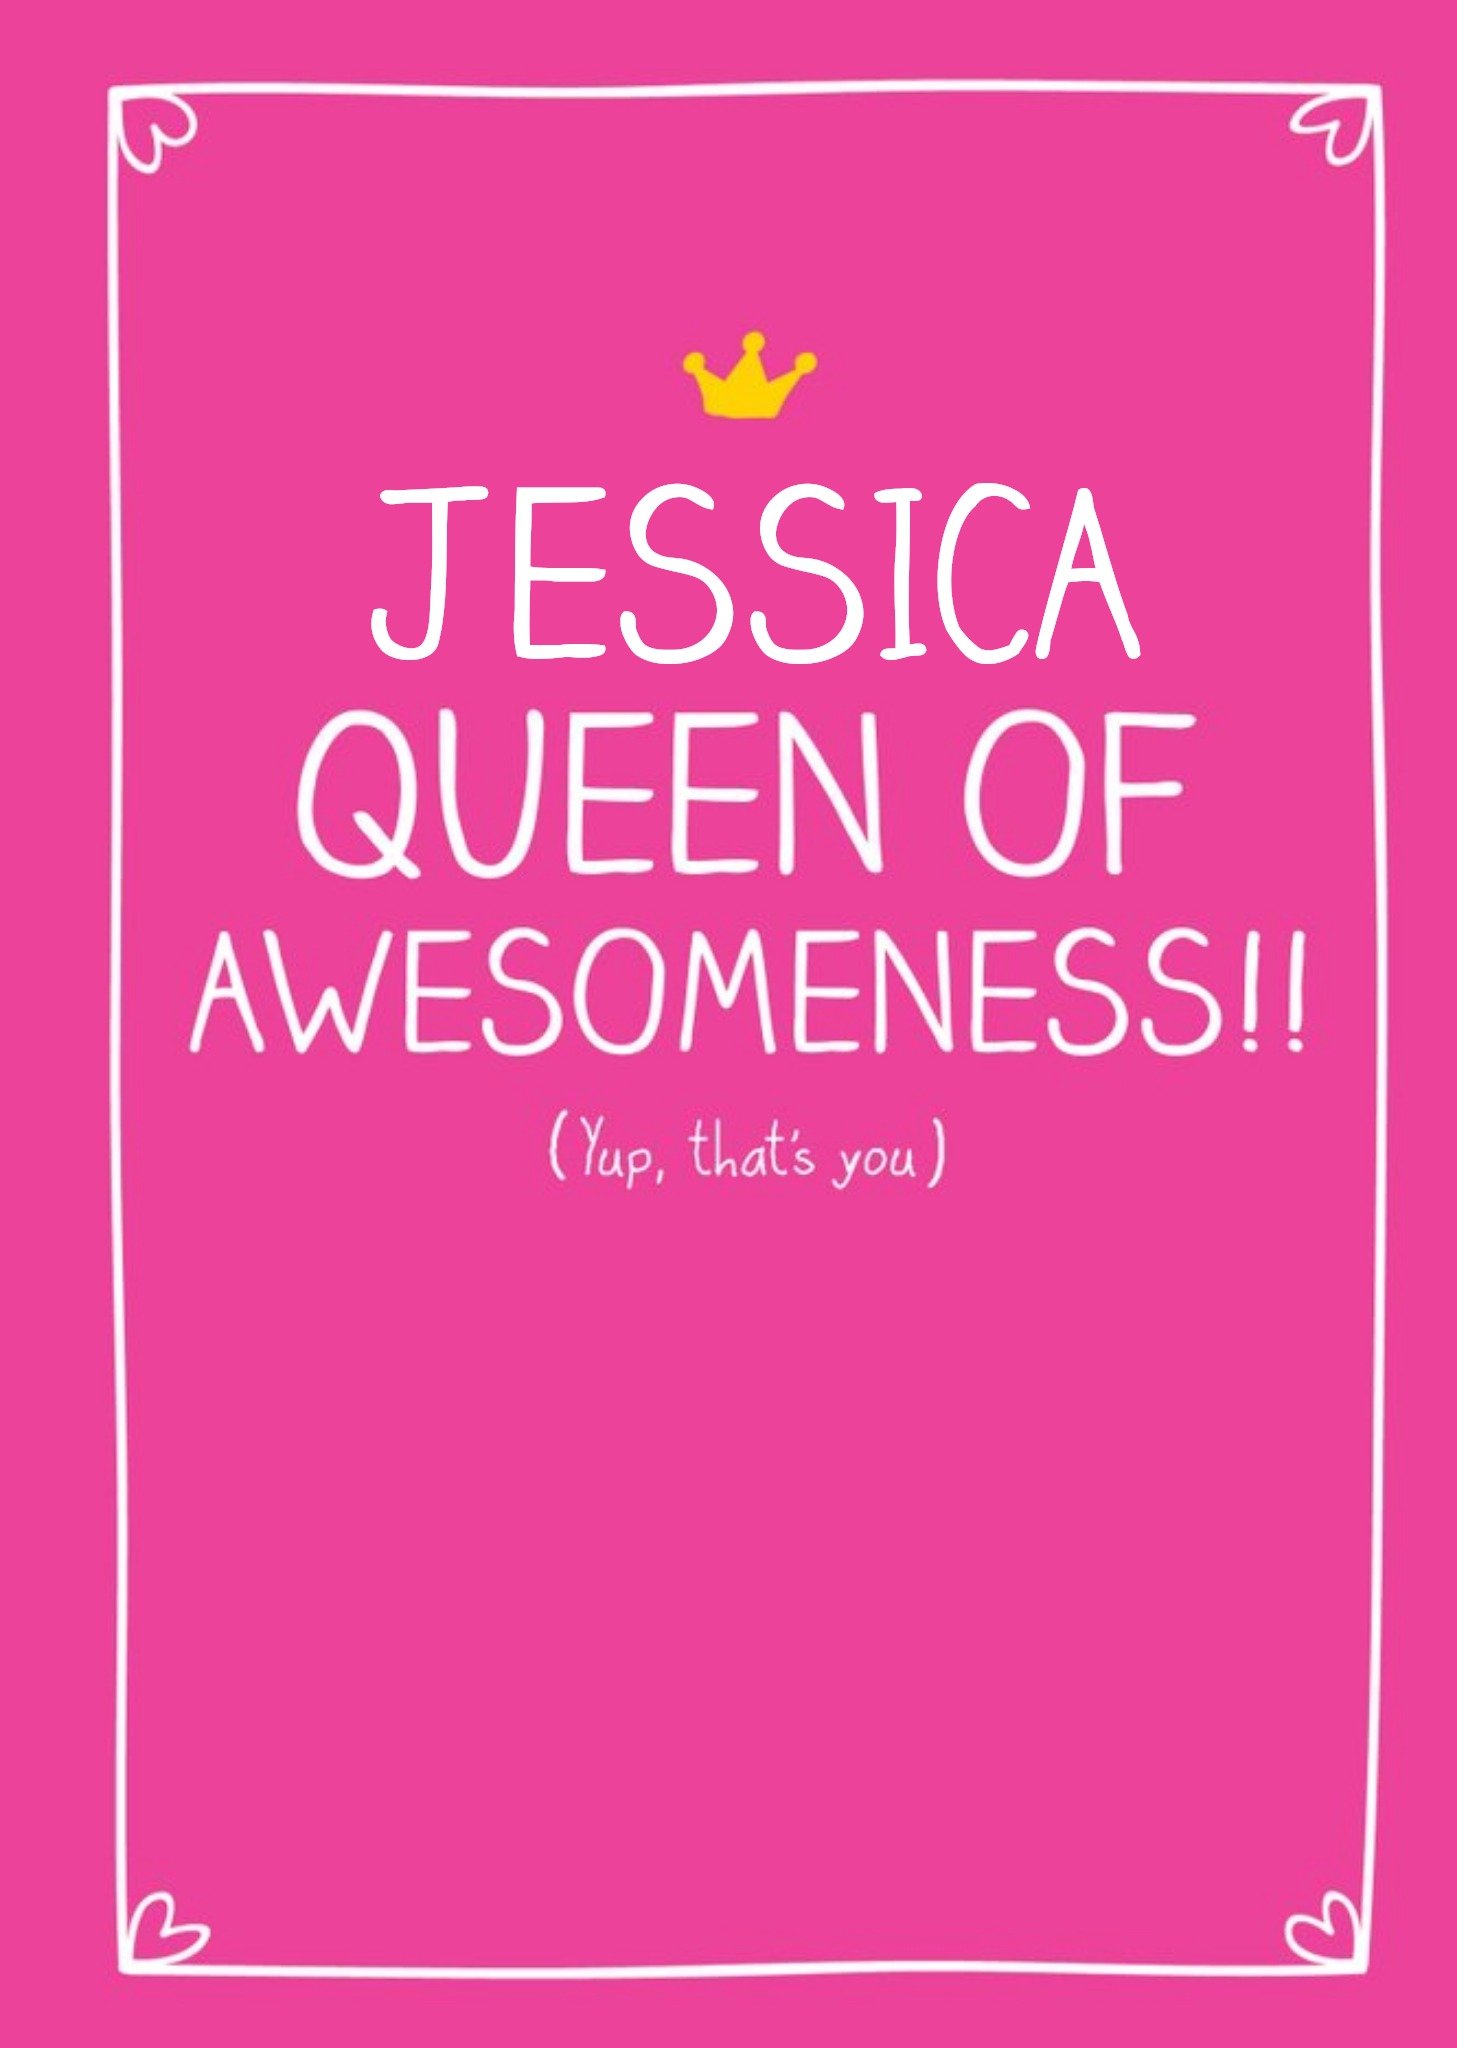 Happy Jackson Queen Of Awesomeness Card Ecard